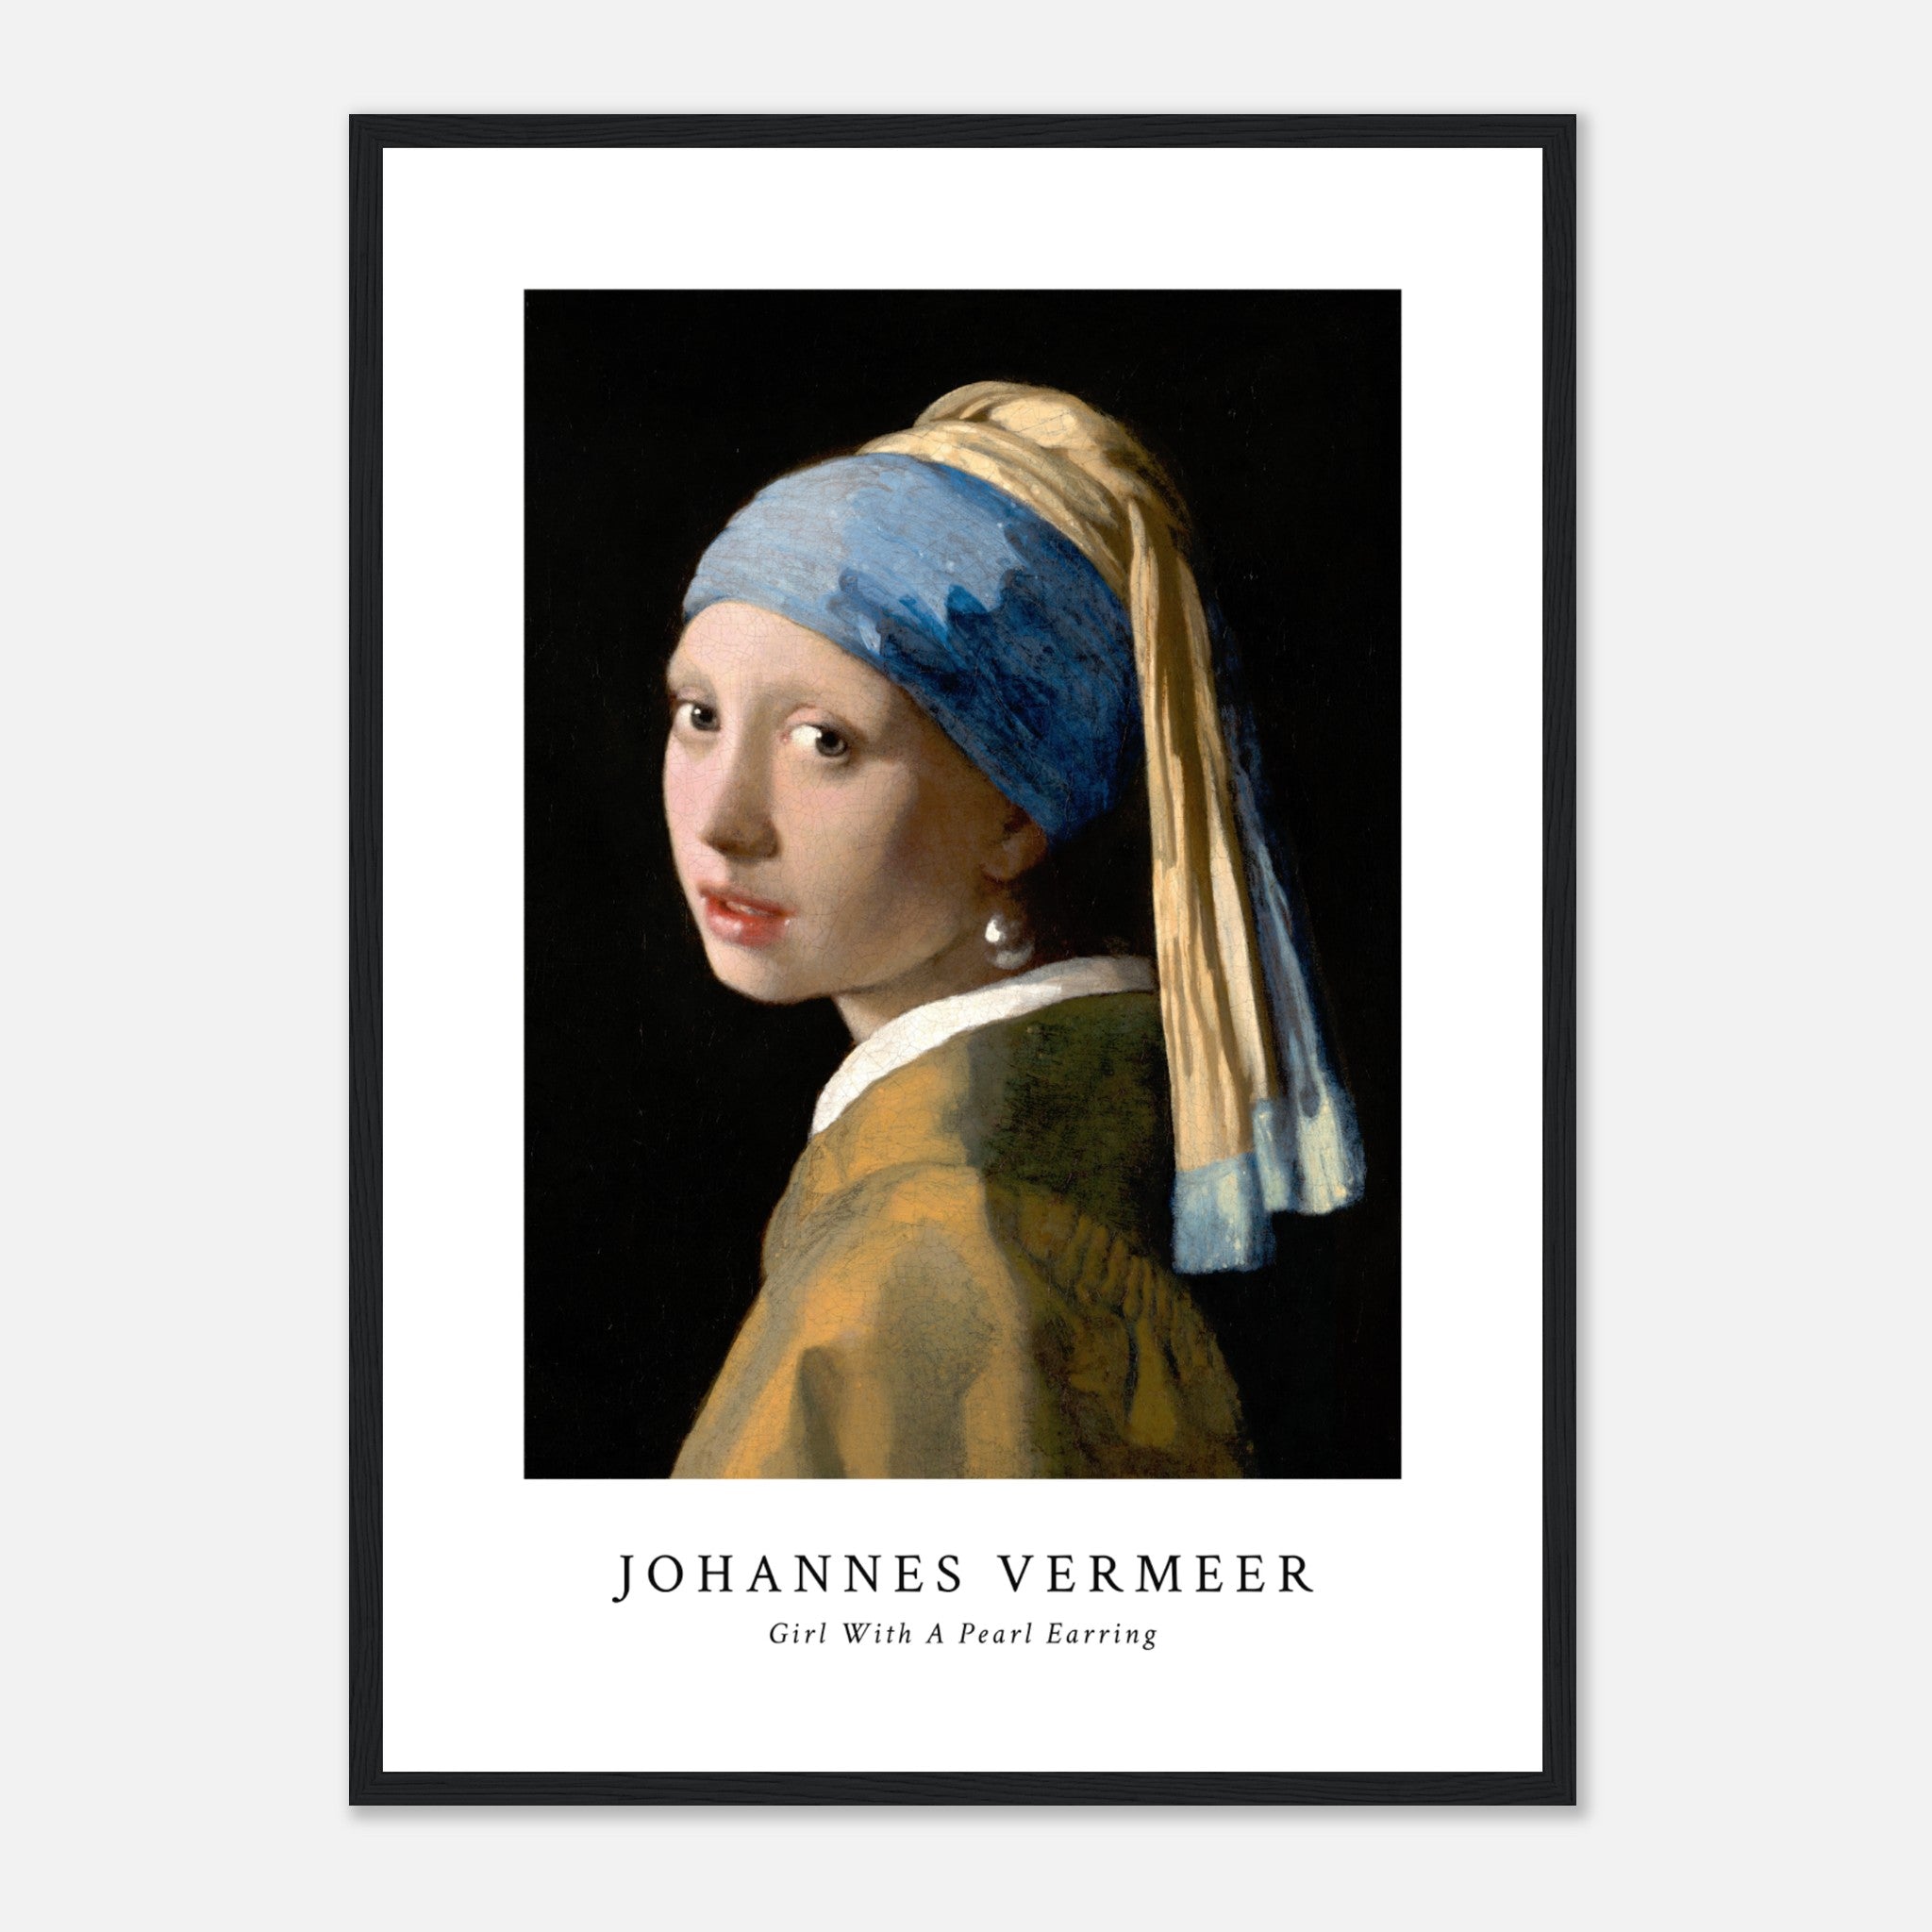 Girl with a Pearl Earring (1665) Poster